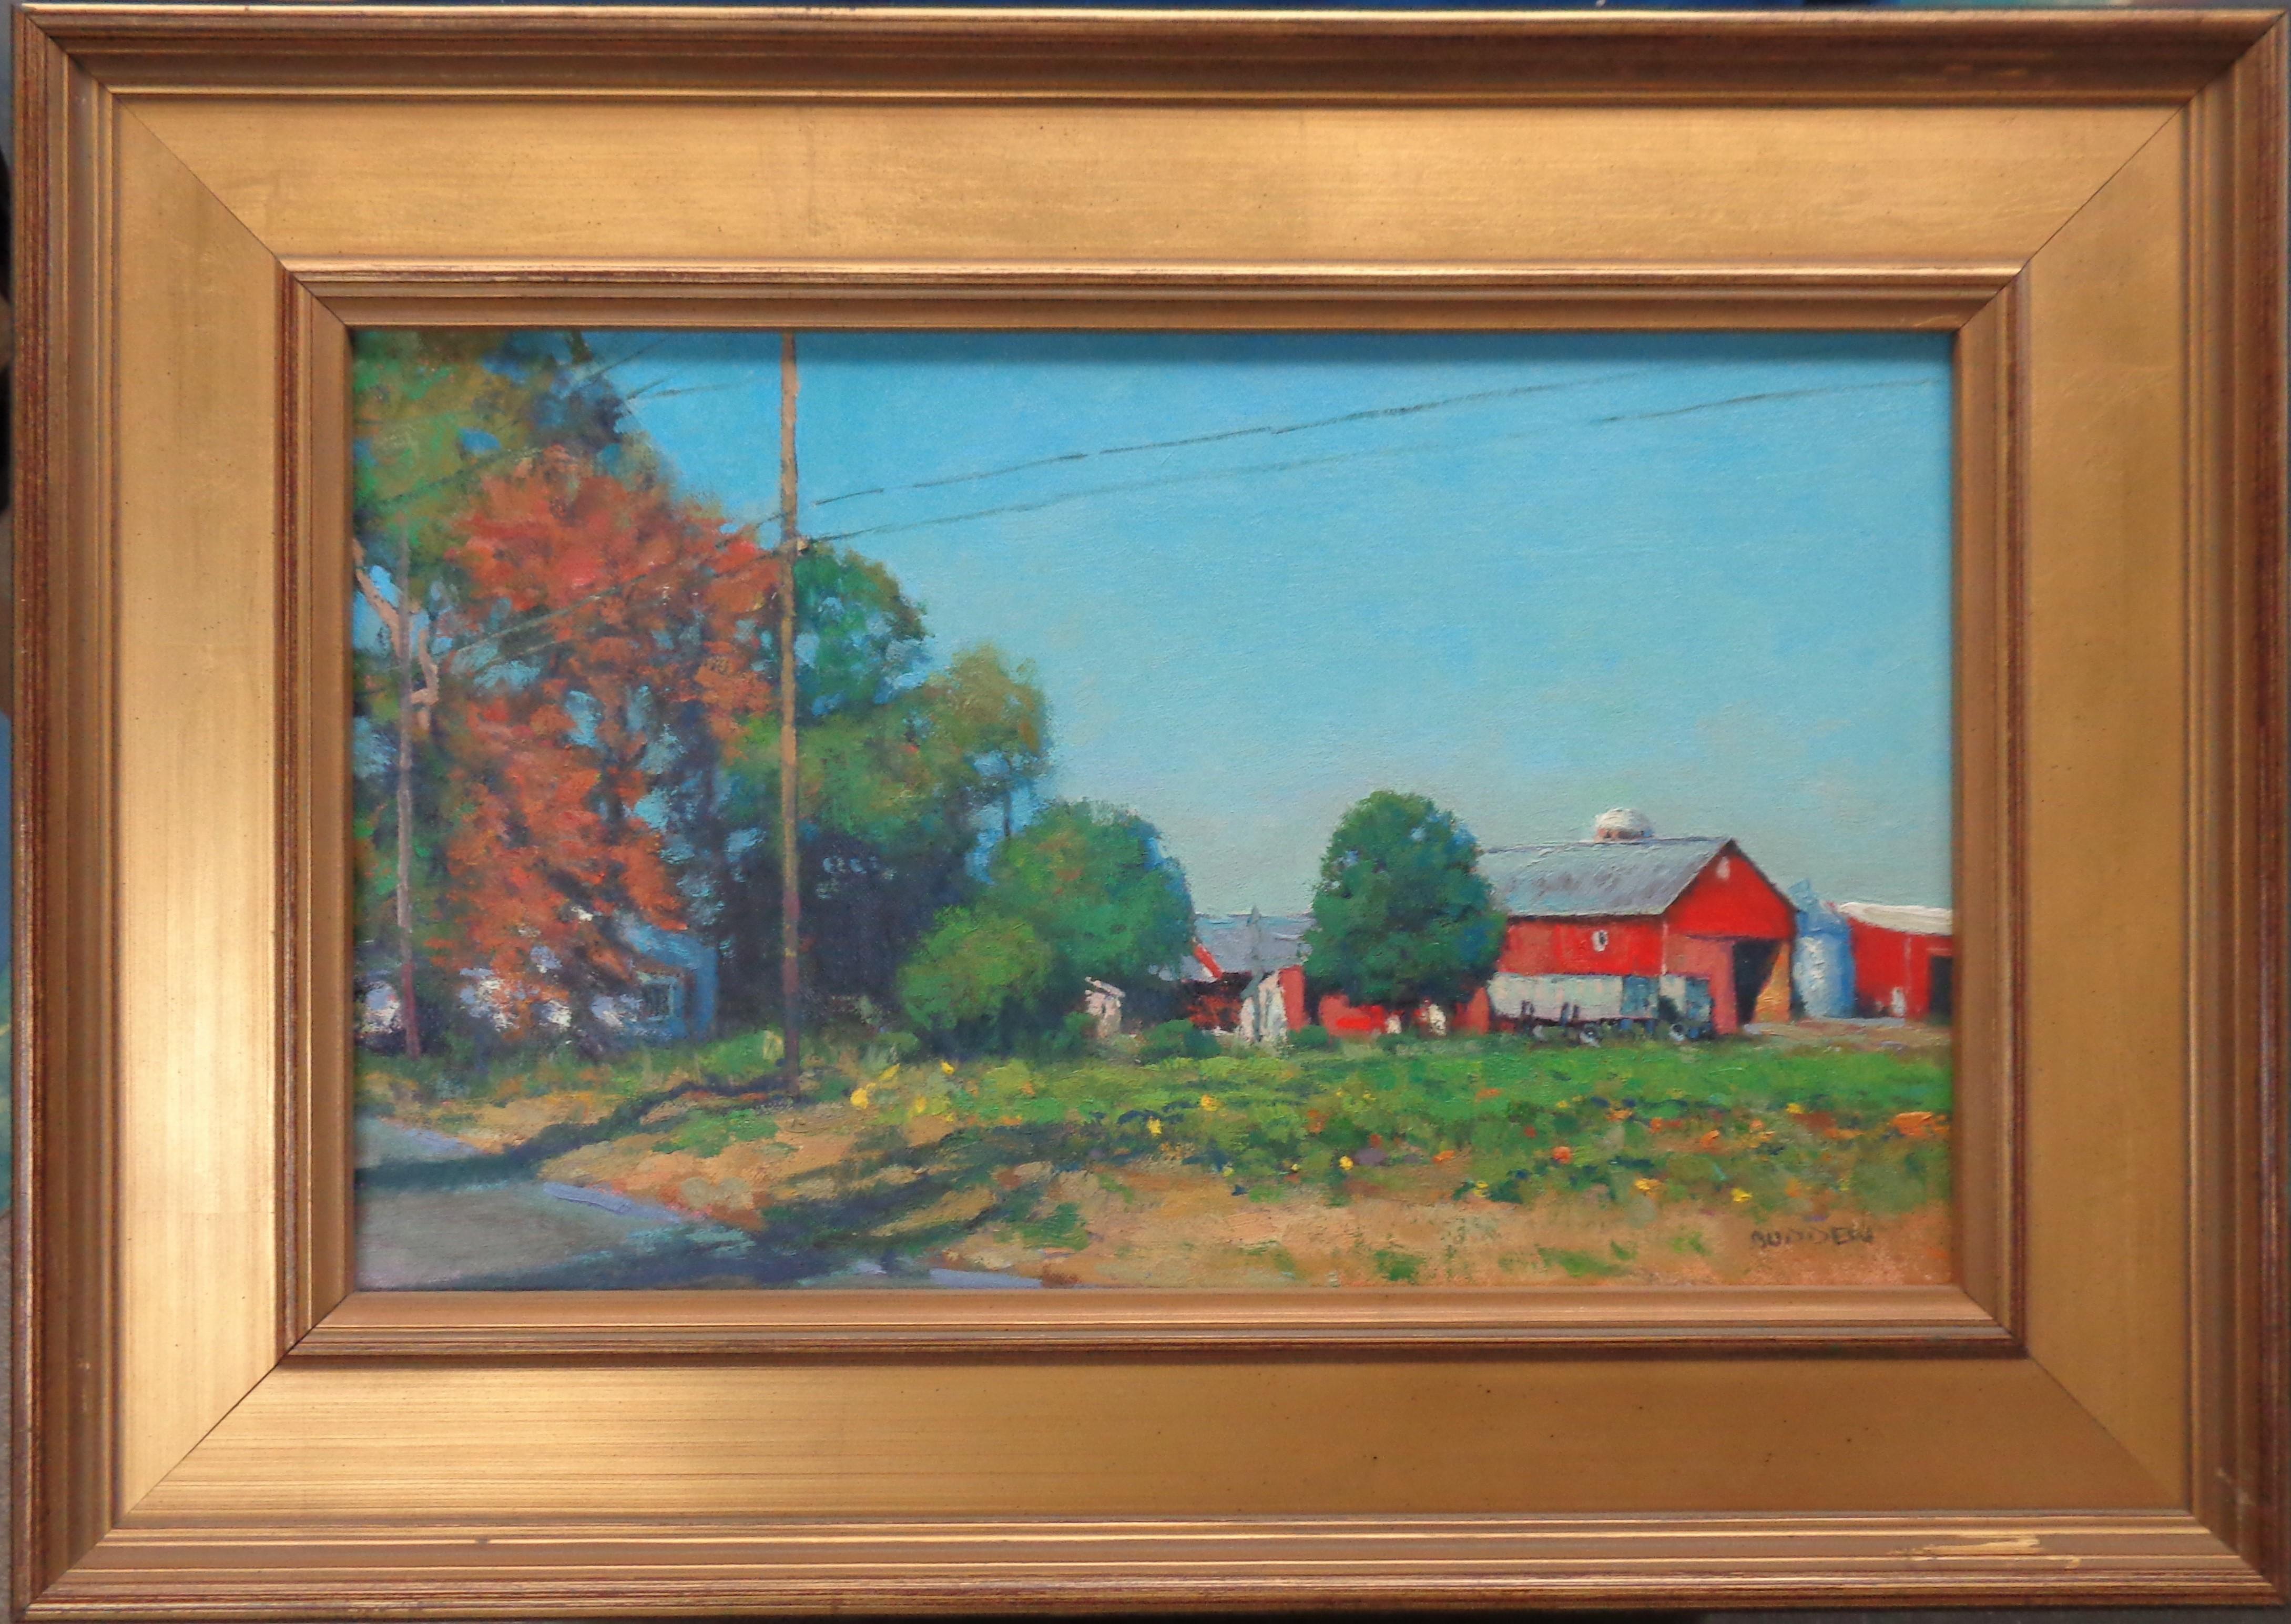 Autumn Farm is an impressionistic landscape plein air oil painting that I did on location near my studio in 2015. The painting is on a canvas panel and exudes the rich qualities of oil paint with bright strong color, a variety of lost and found